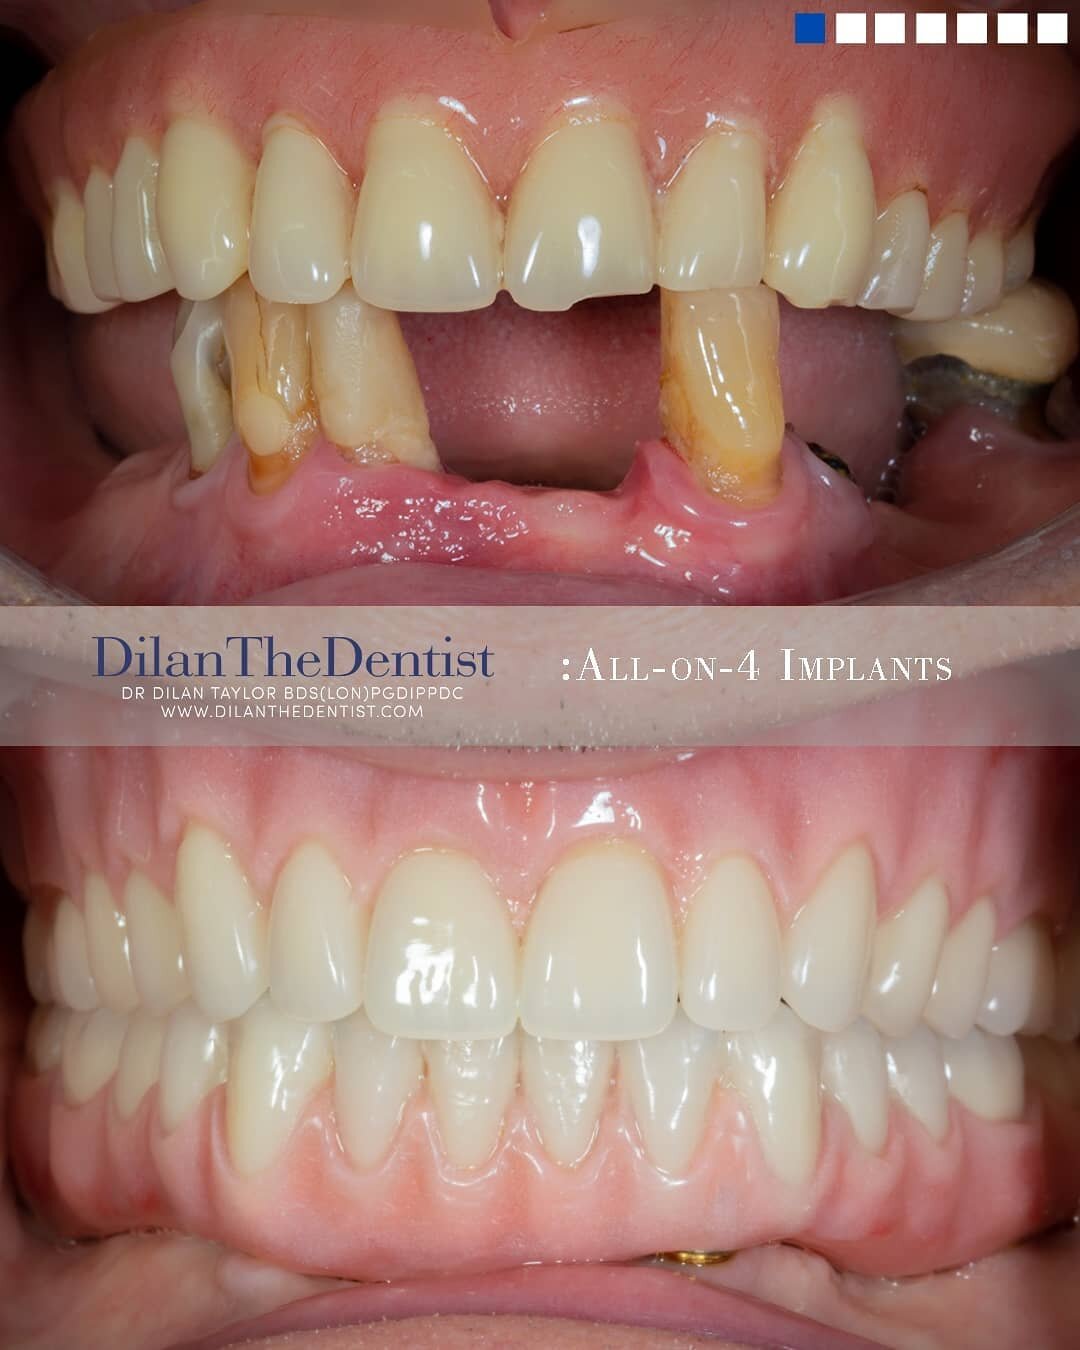 This gentlemen was referred to me to see what could be done after having increasing difficulities chewing his food.

After considering the pattern of on going toothless we decided upon removal of the remaining lower teeth, recontouring of the lower j